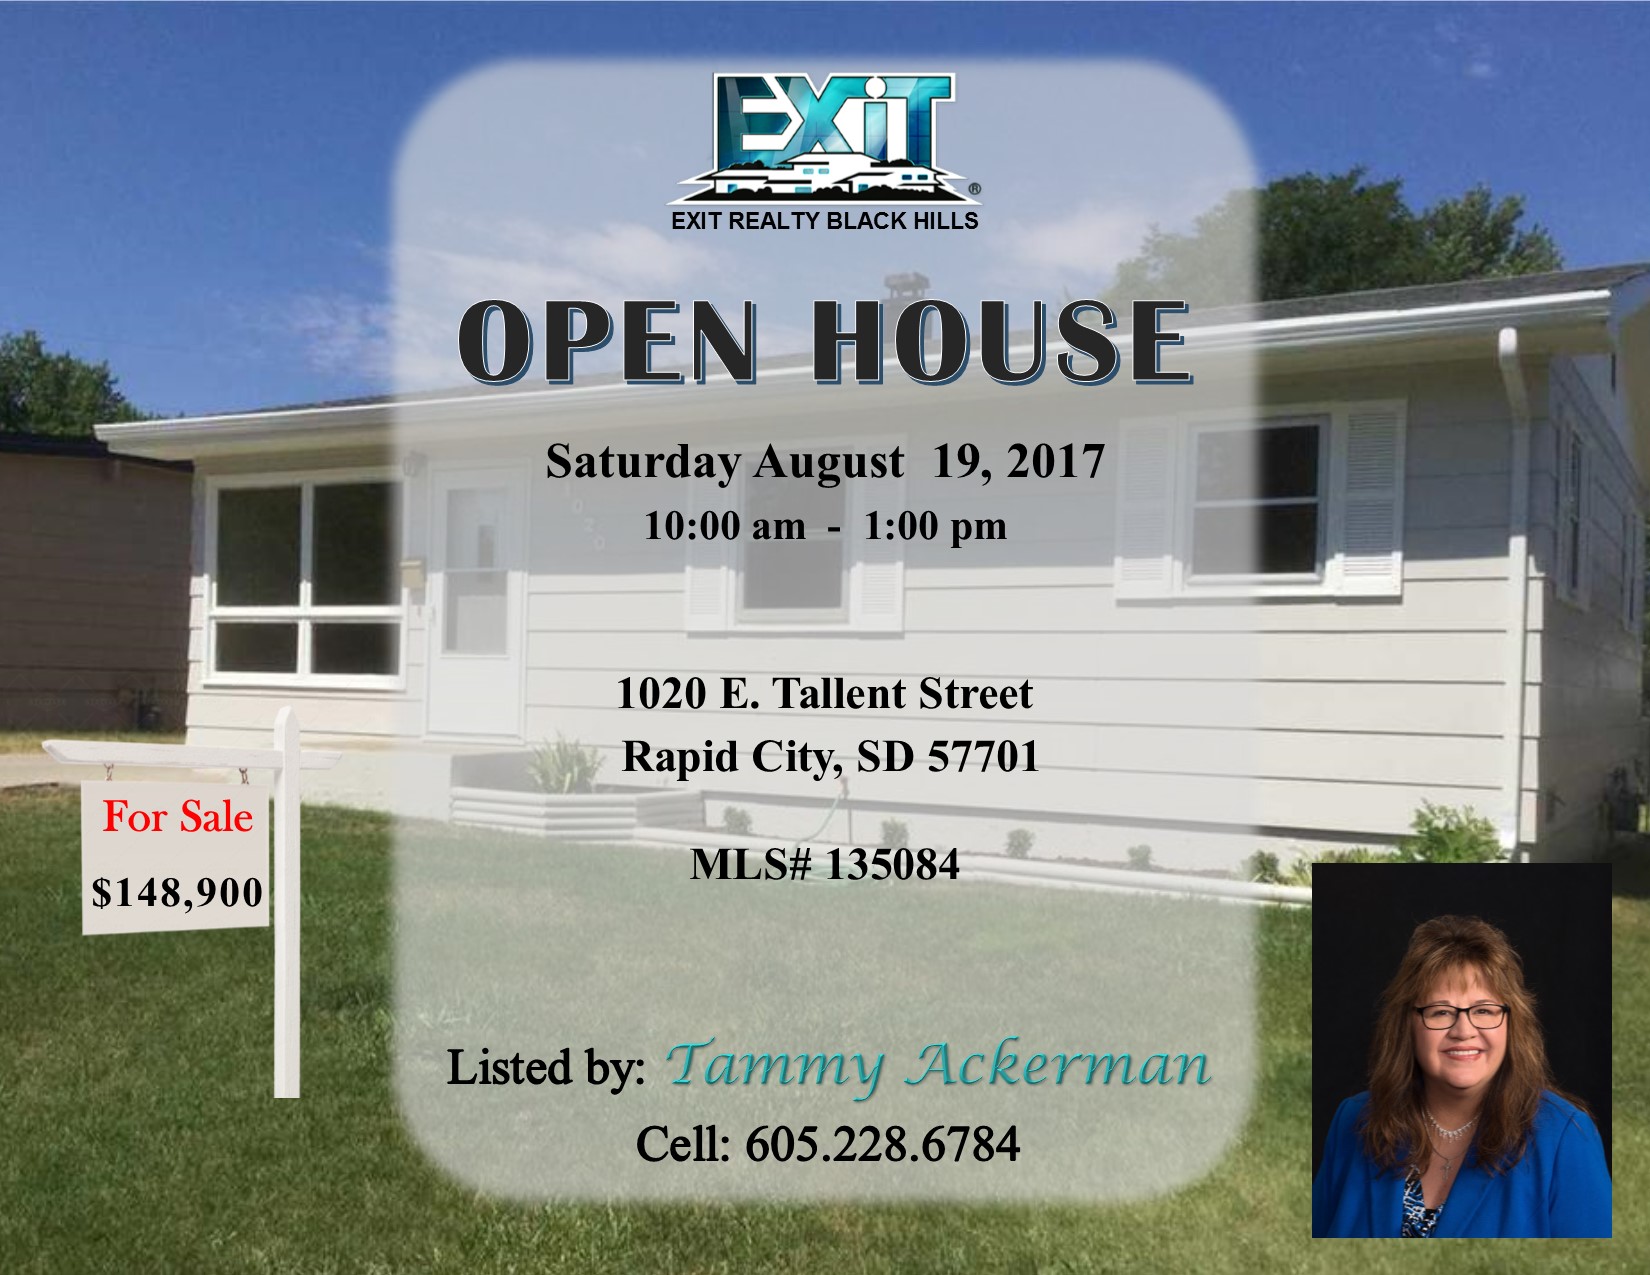 OPEN HOUSE Saturday August 19, 2017